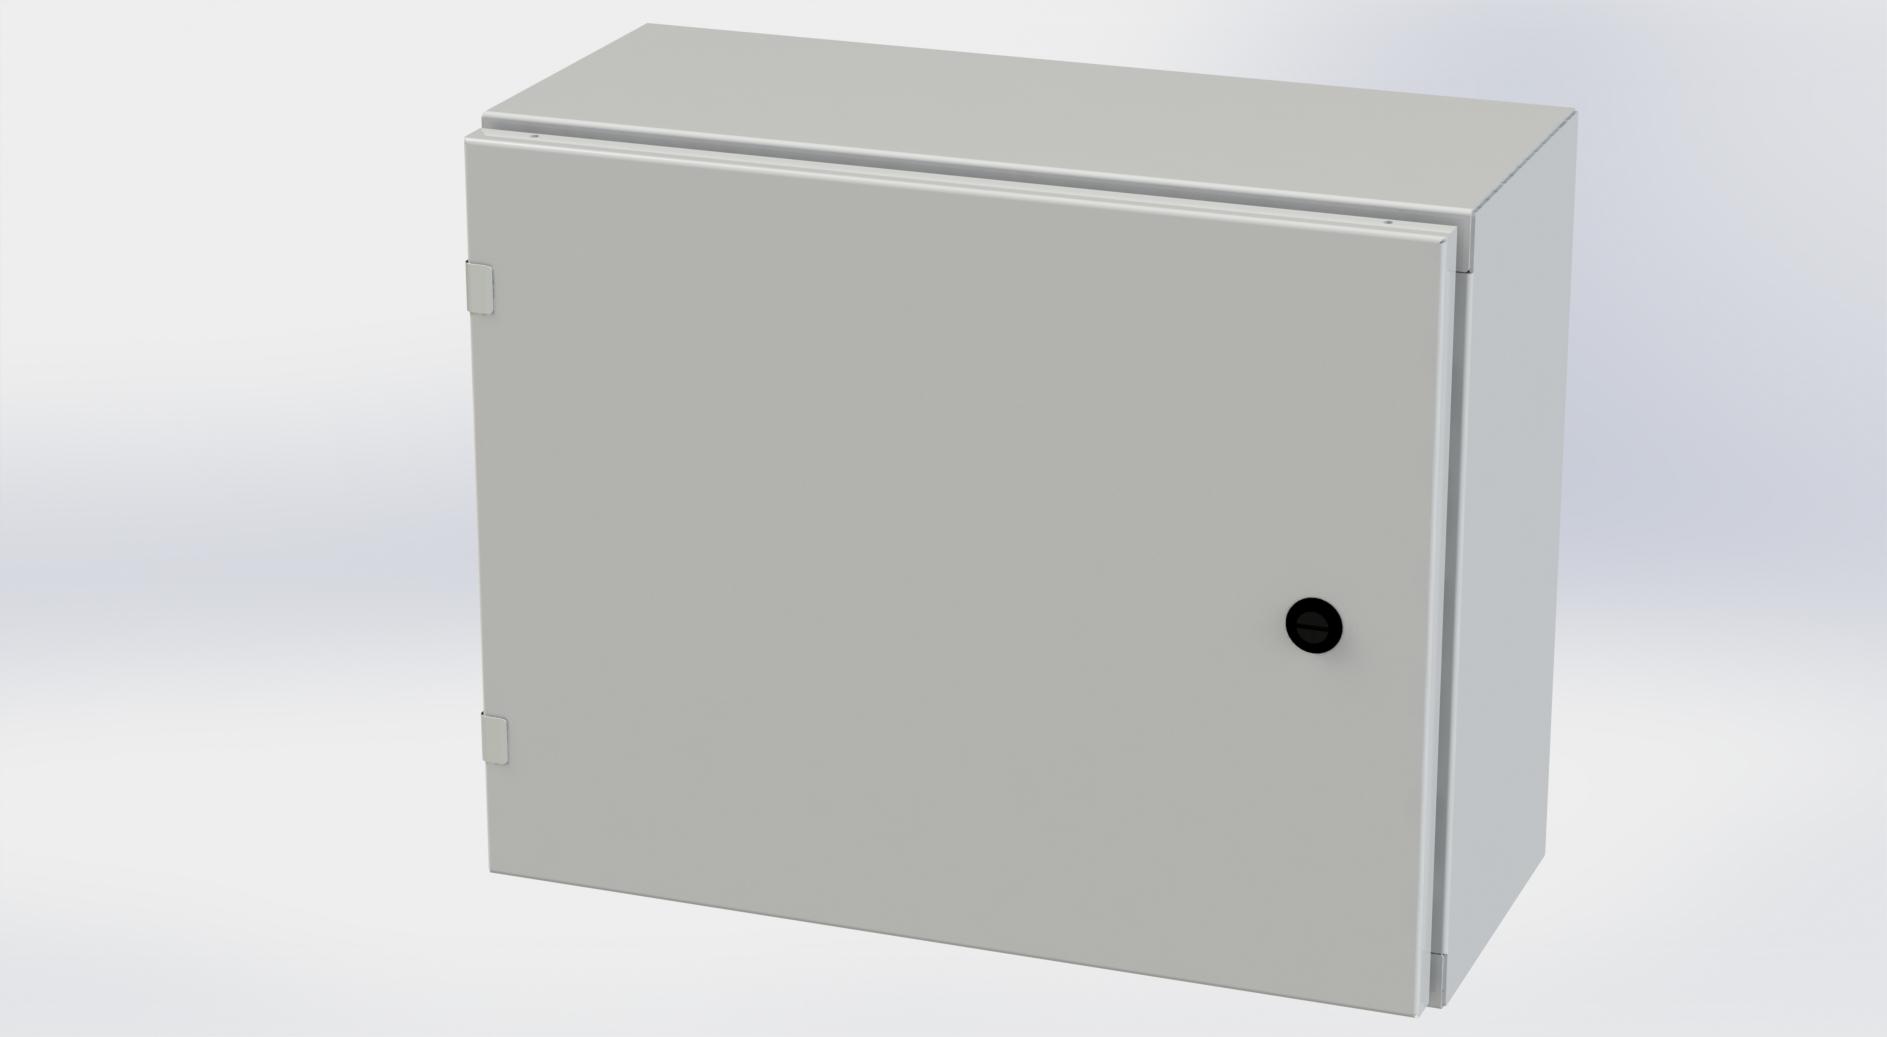 Saginaw Control SCE-16EL2008LPLG EL Enclosure, Height:16.00", Width:20.00", Depth:8.00", RAL 7035 gray powder coating inside and out. Optional sub-panels are powder coated white.